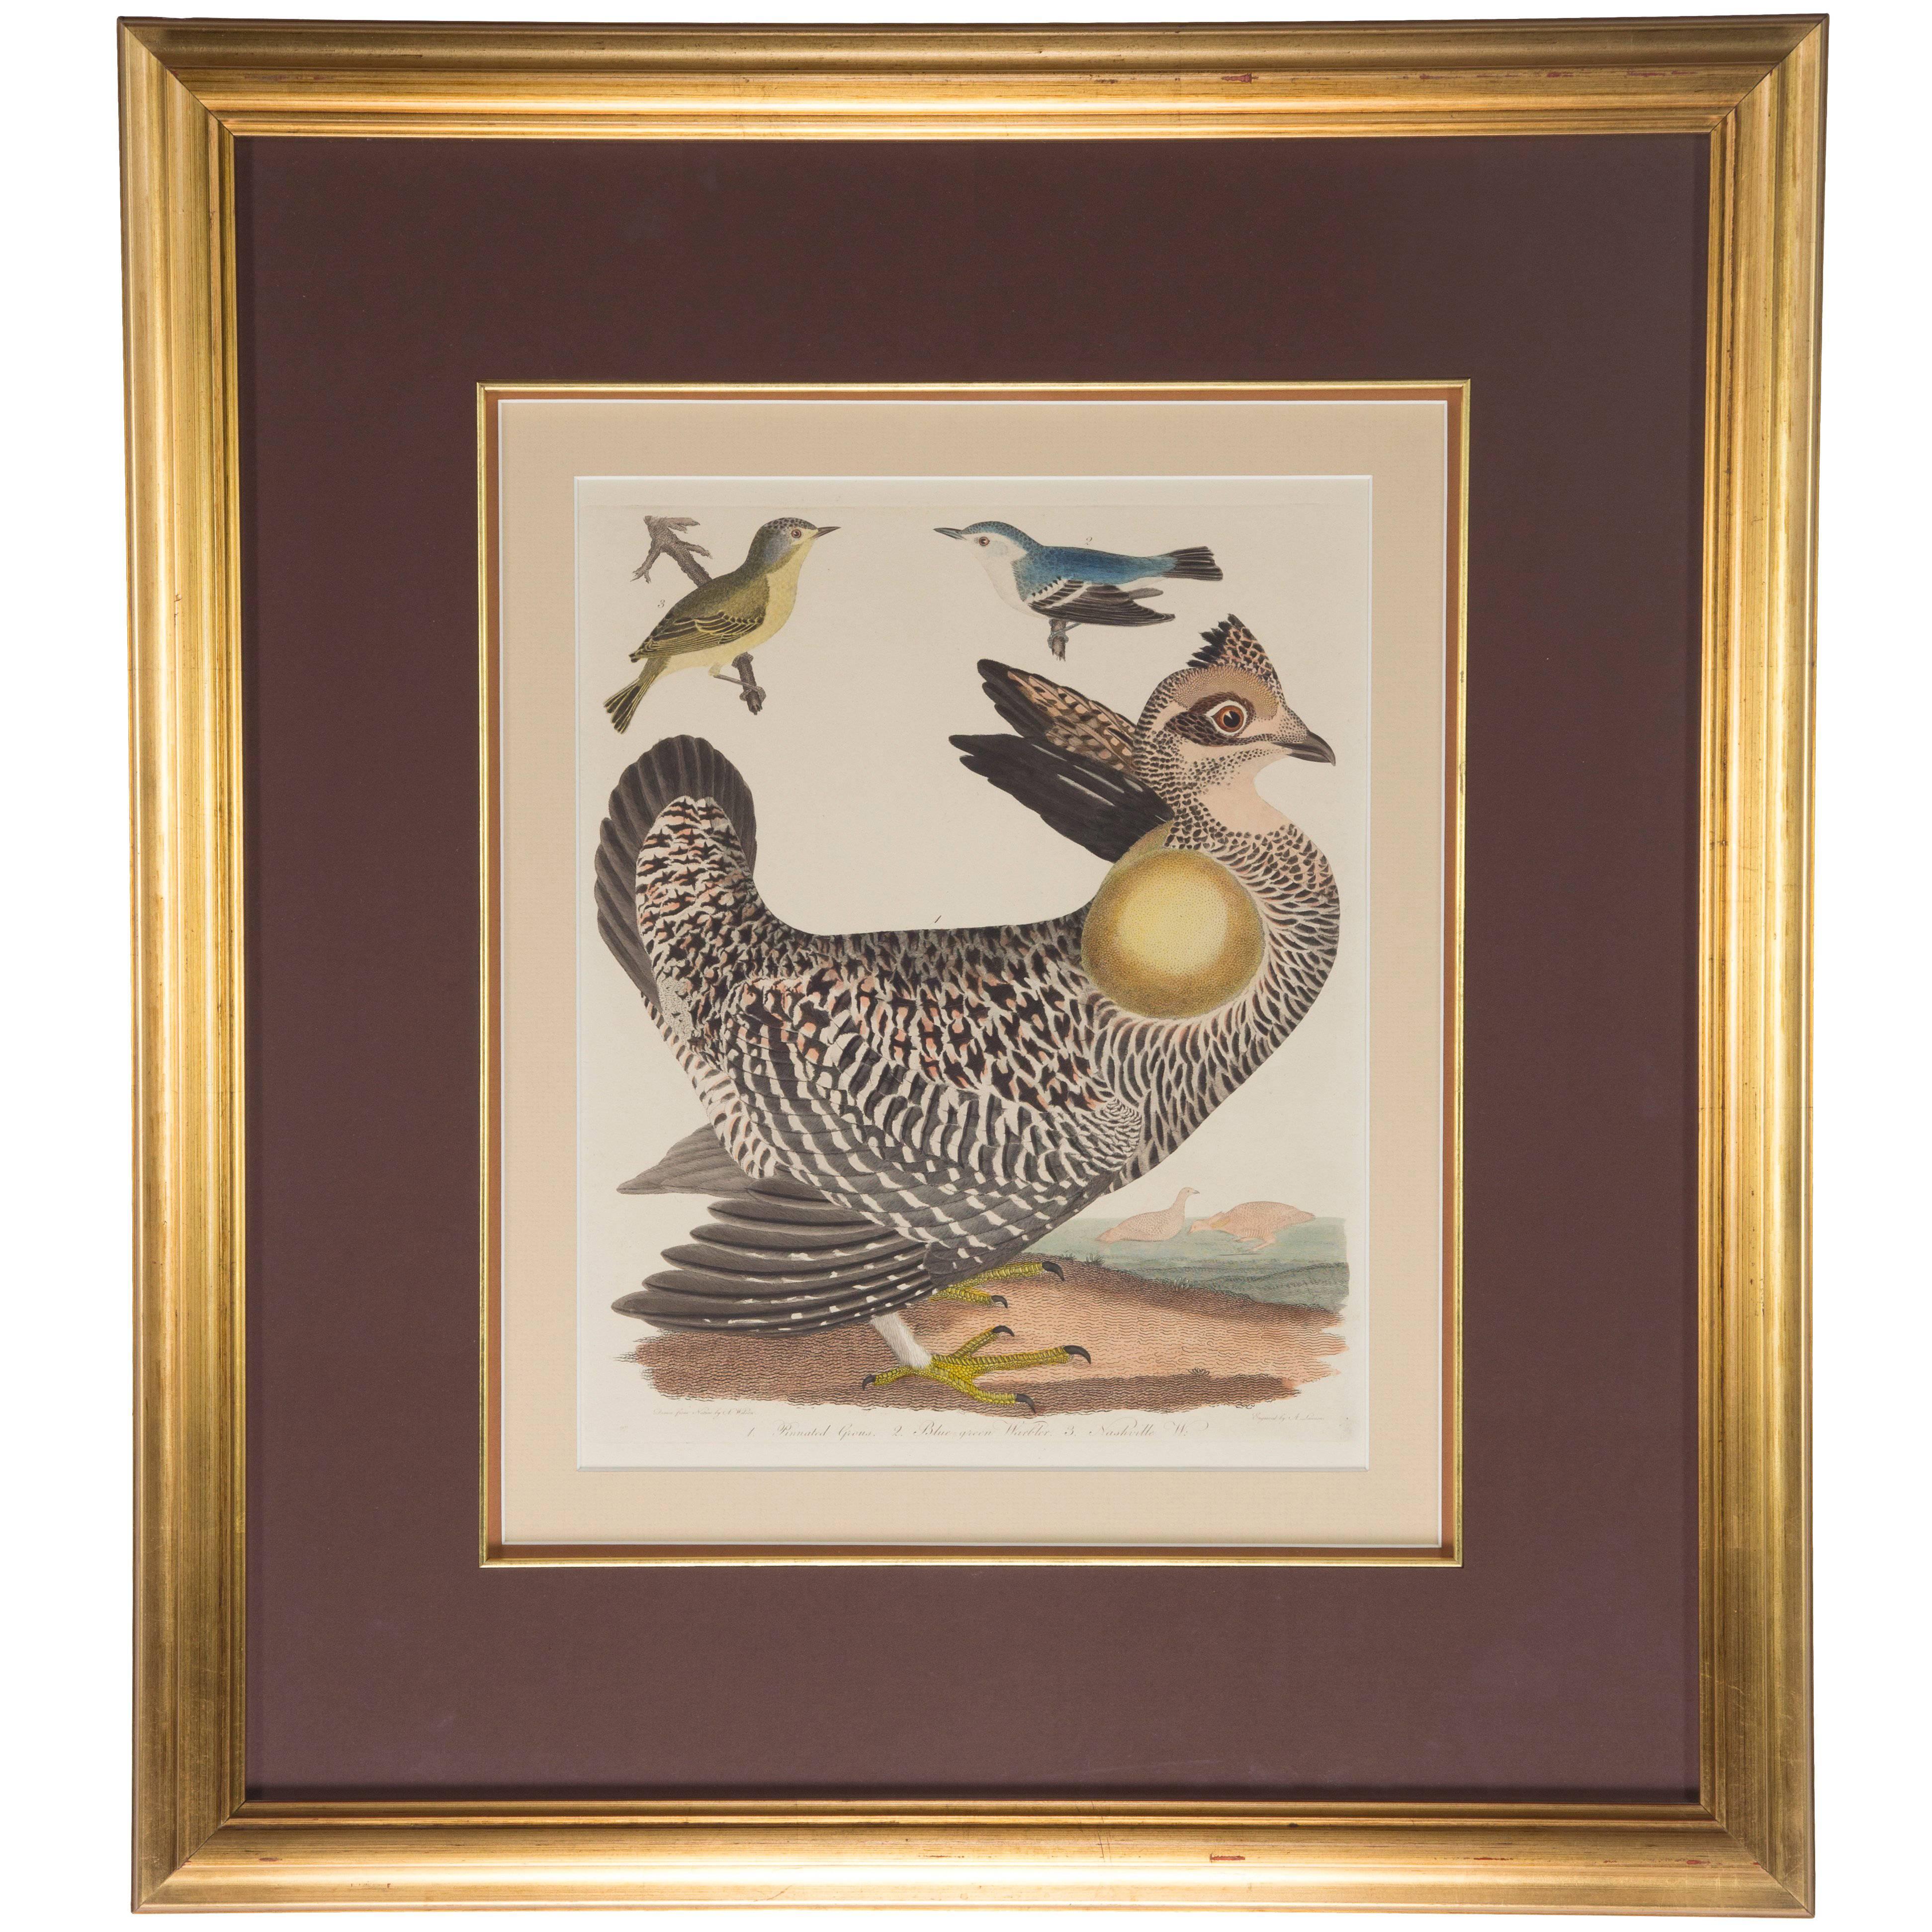 Ornithological Hand-Painted Alexander Wilson Engraving